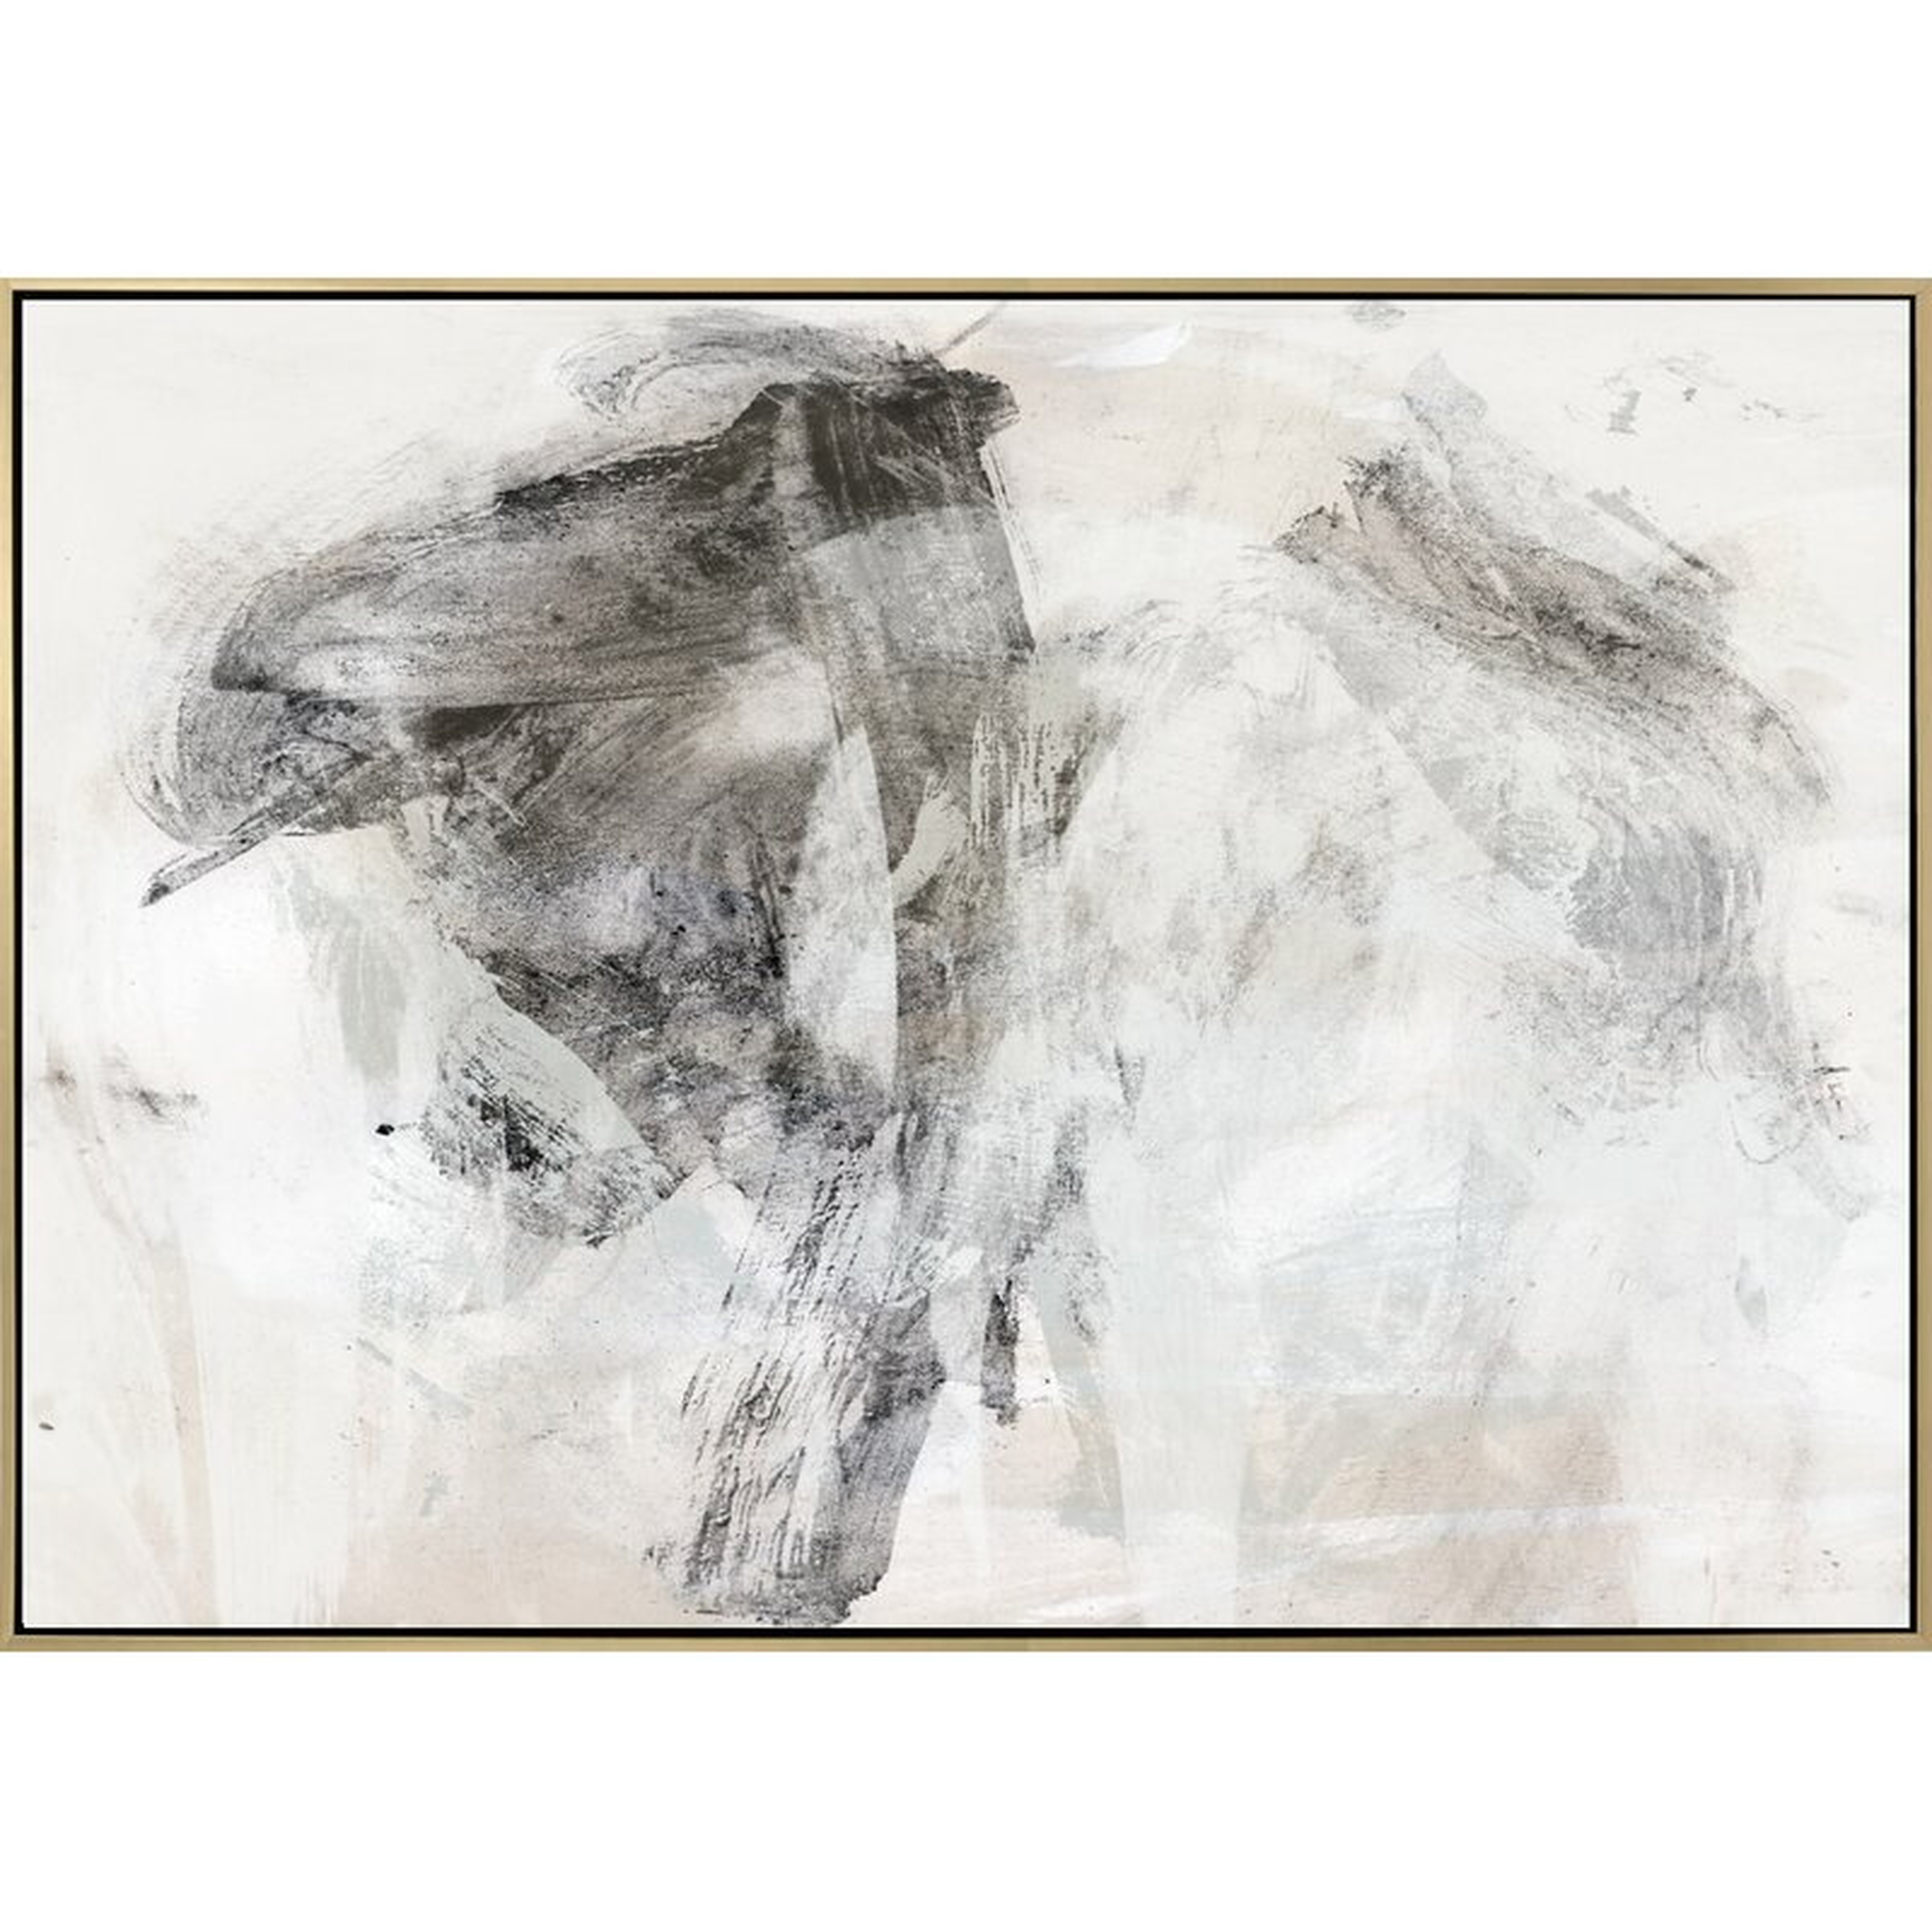 SMOKE I BY JORDAN CARLYLE - FLOATER FRAME GRAPHIC ART PRINT ON CANVAS / 36" x 48" - Perigold